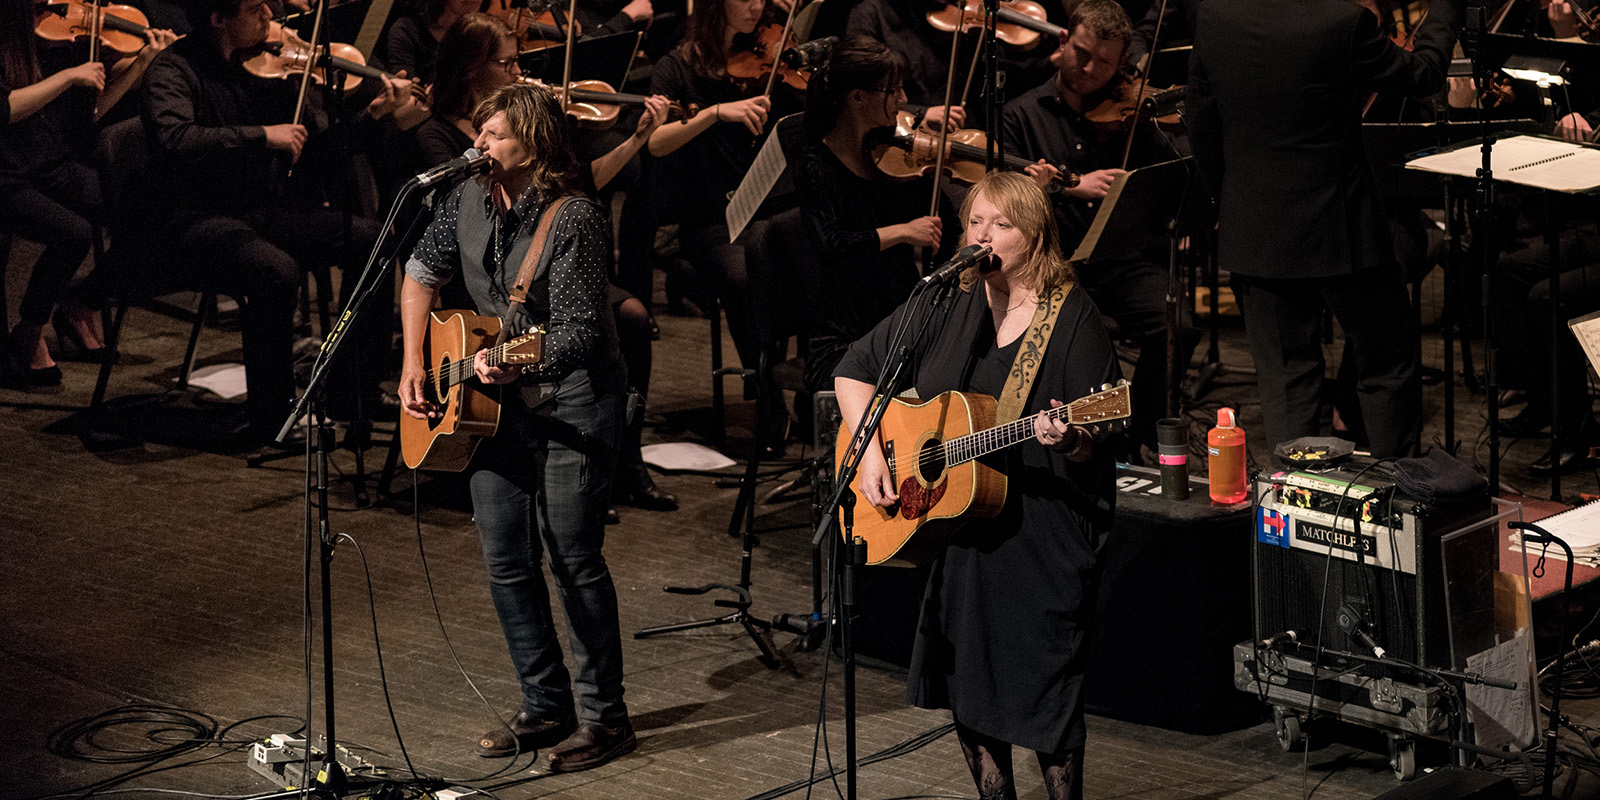 Indigo Girls perform on stage with a large orchestra